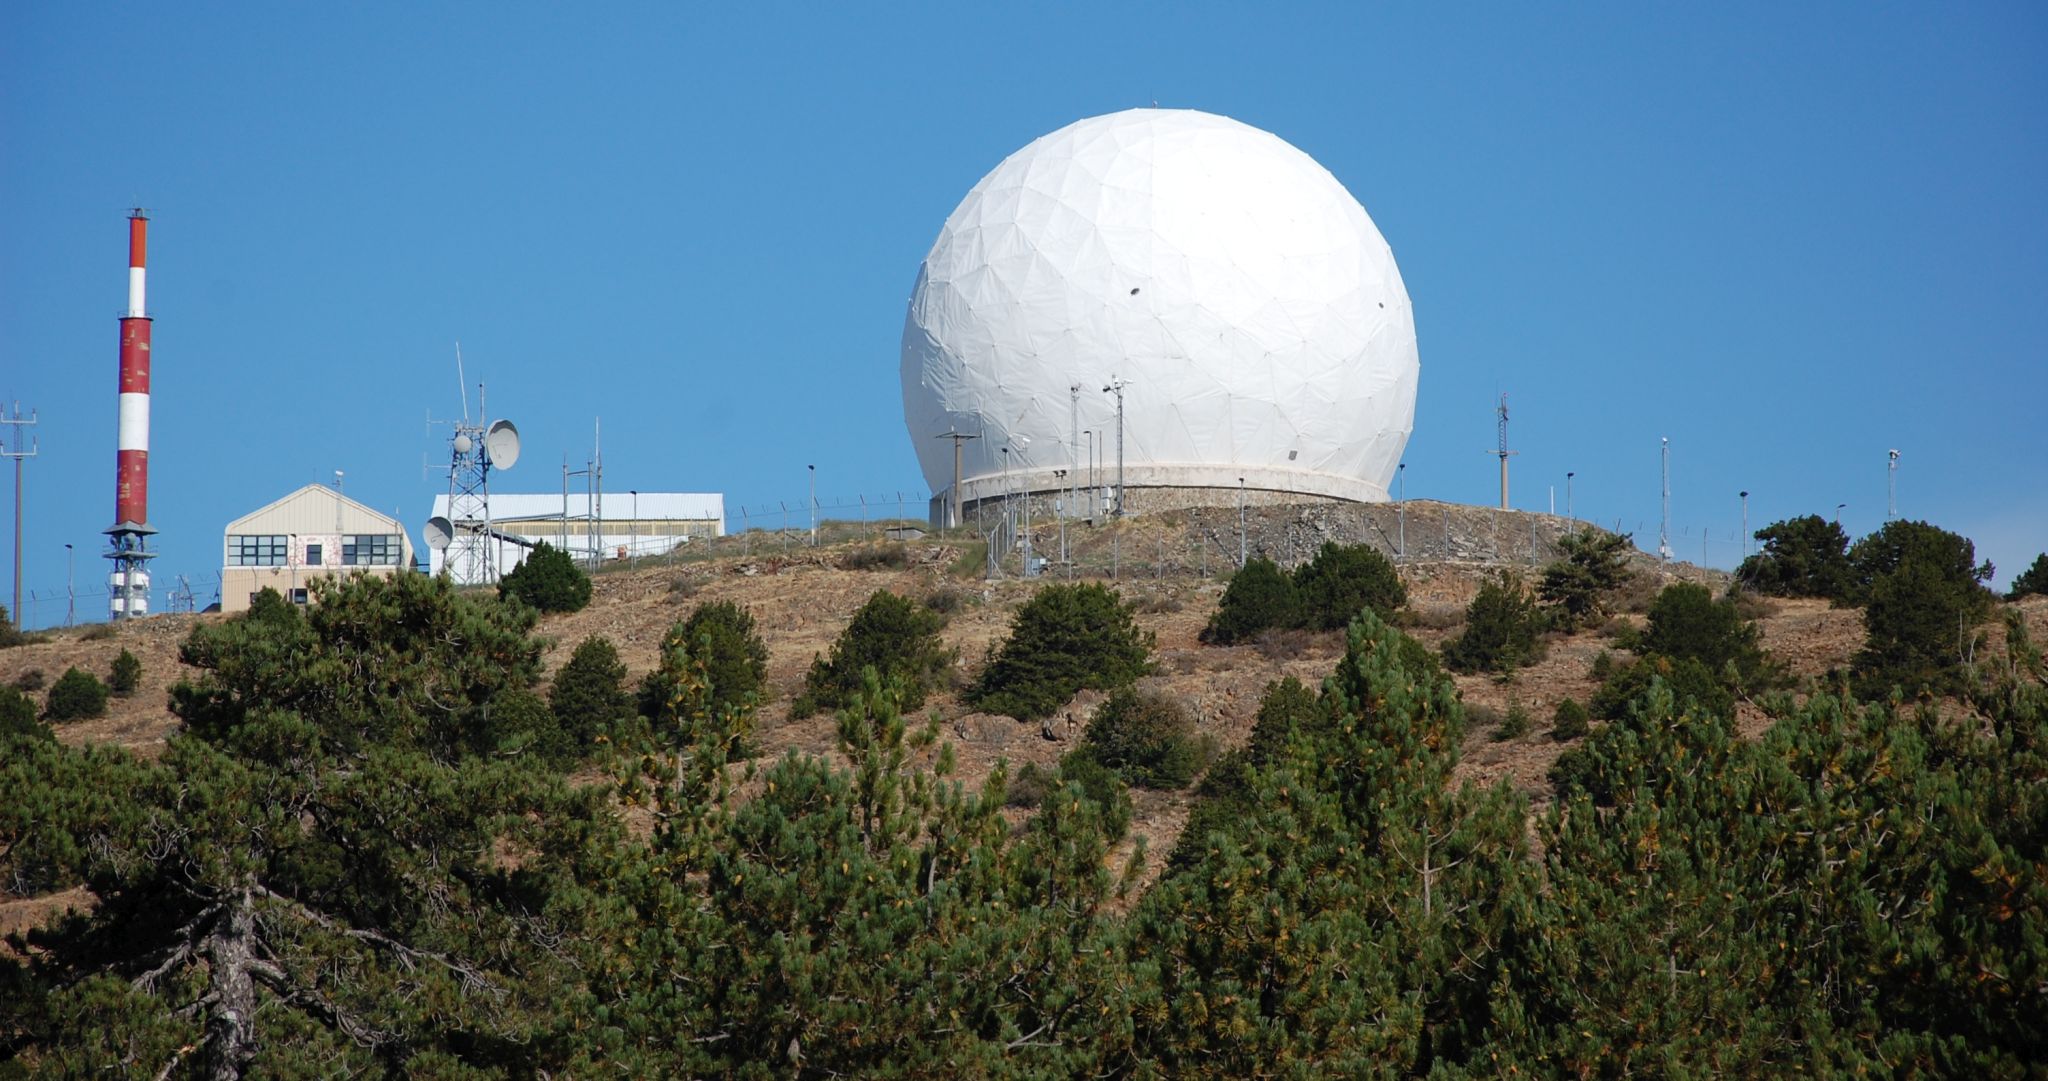 The dome of the UK radar station on the summit of Mount Olympus